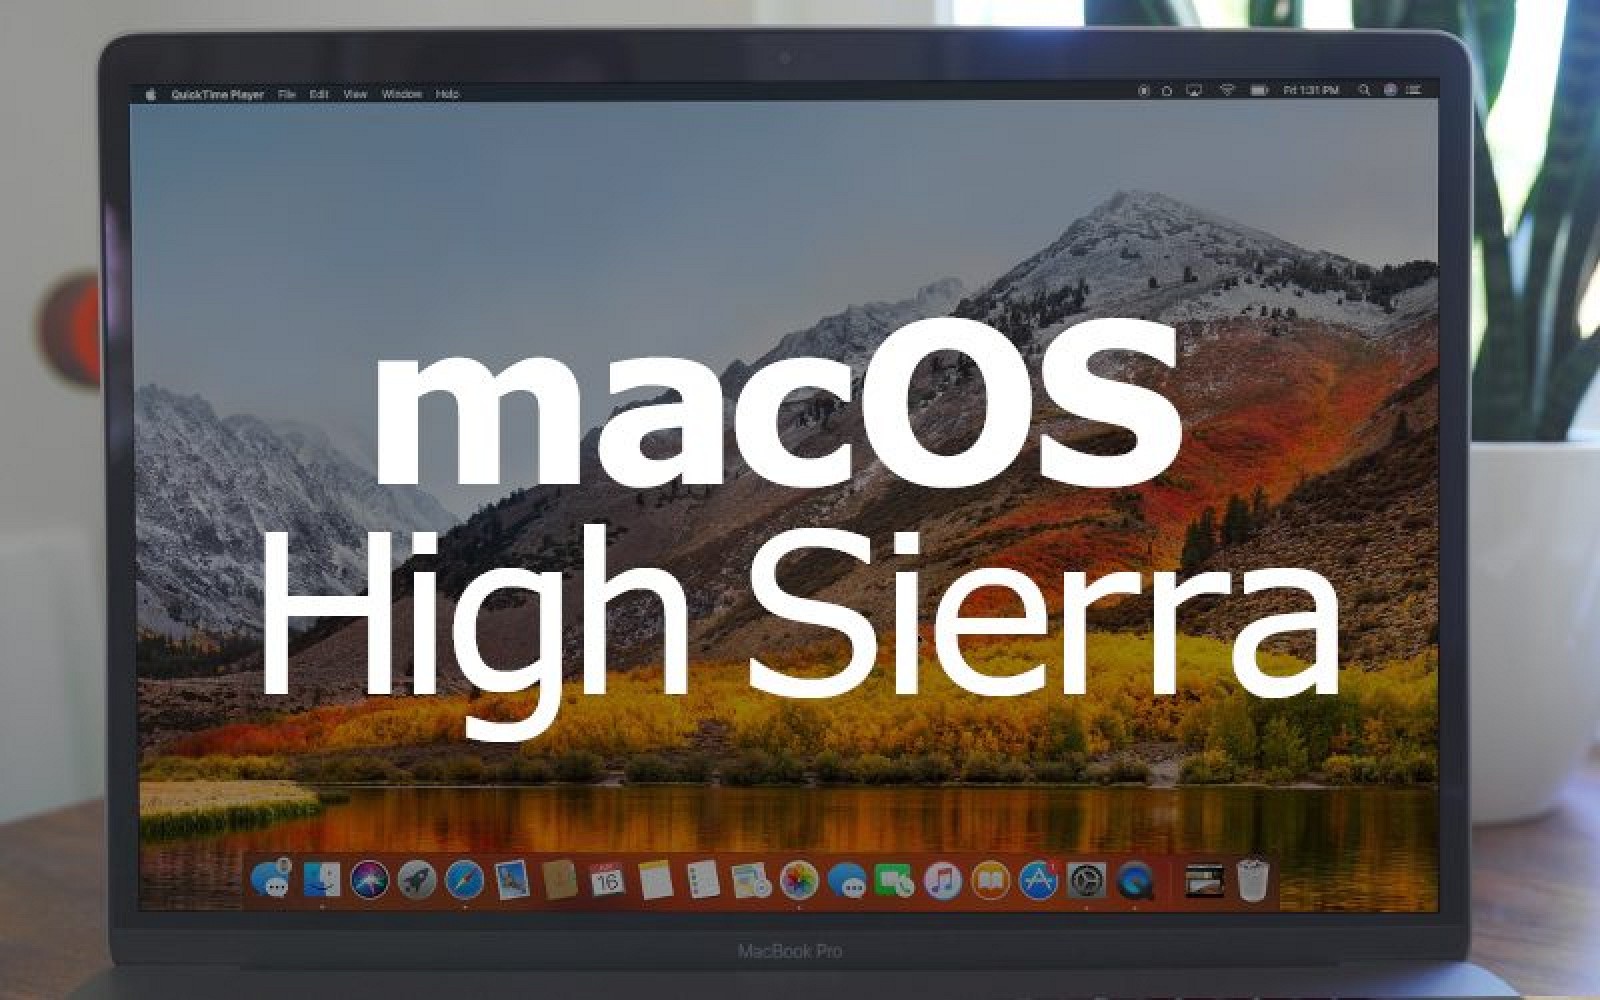 Macos High Sierra Software Compatibility